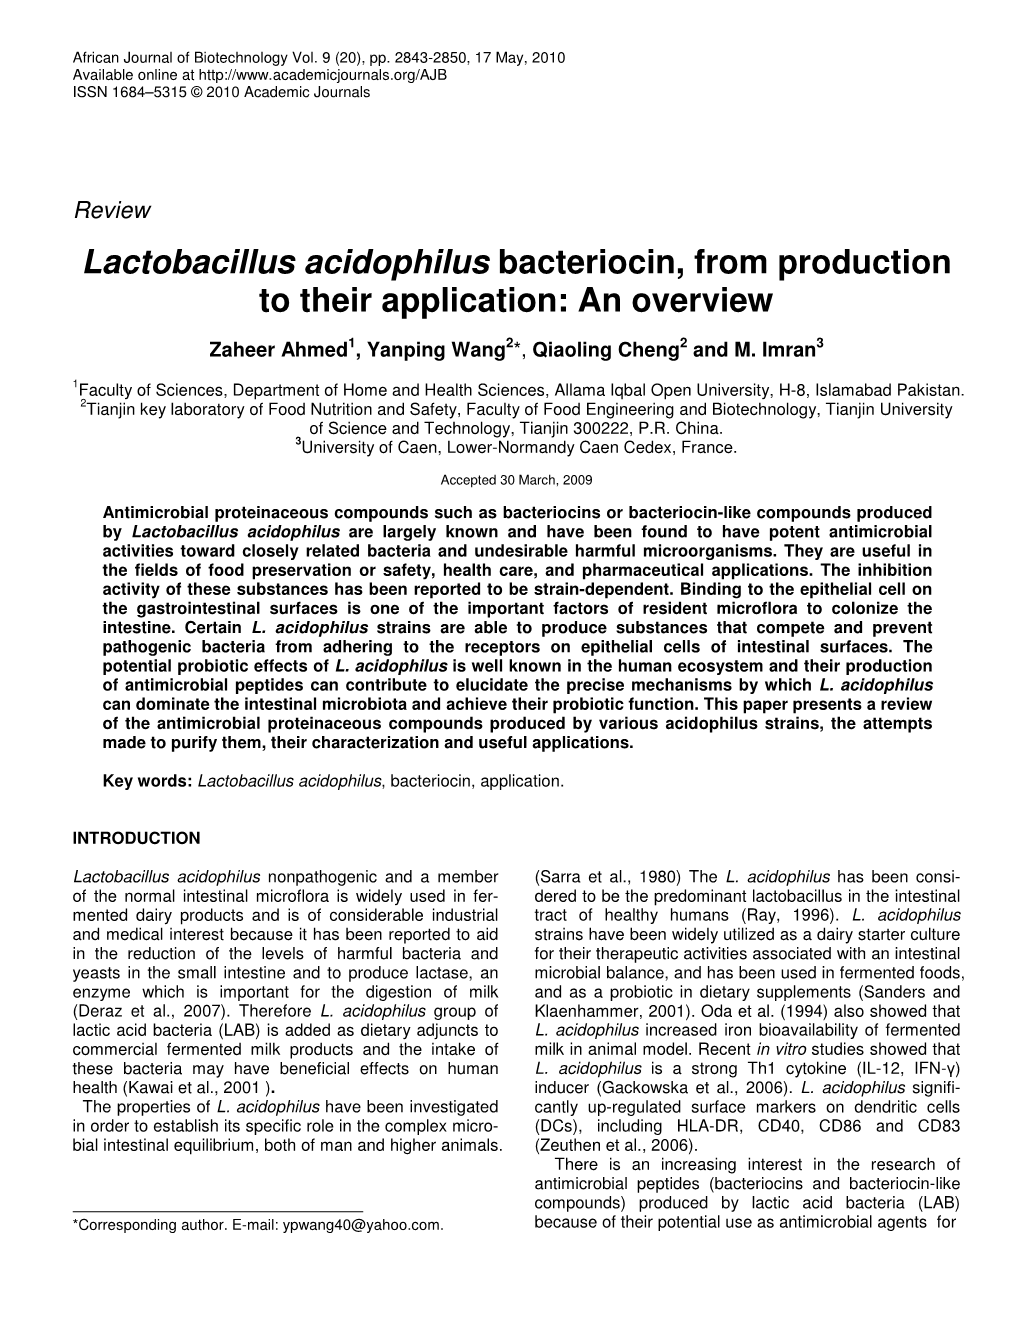 Lactobacillus Acidophilus Bacteriocin, from Production to Their Application: an Overview